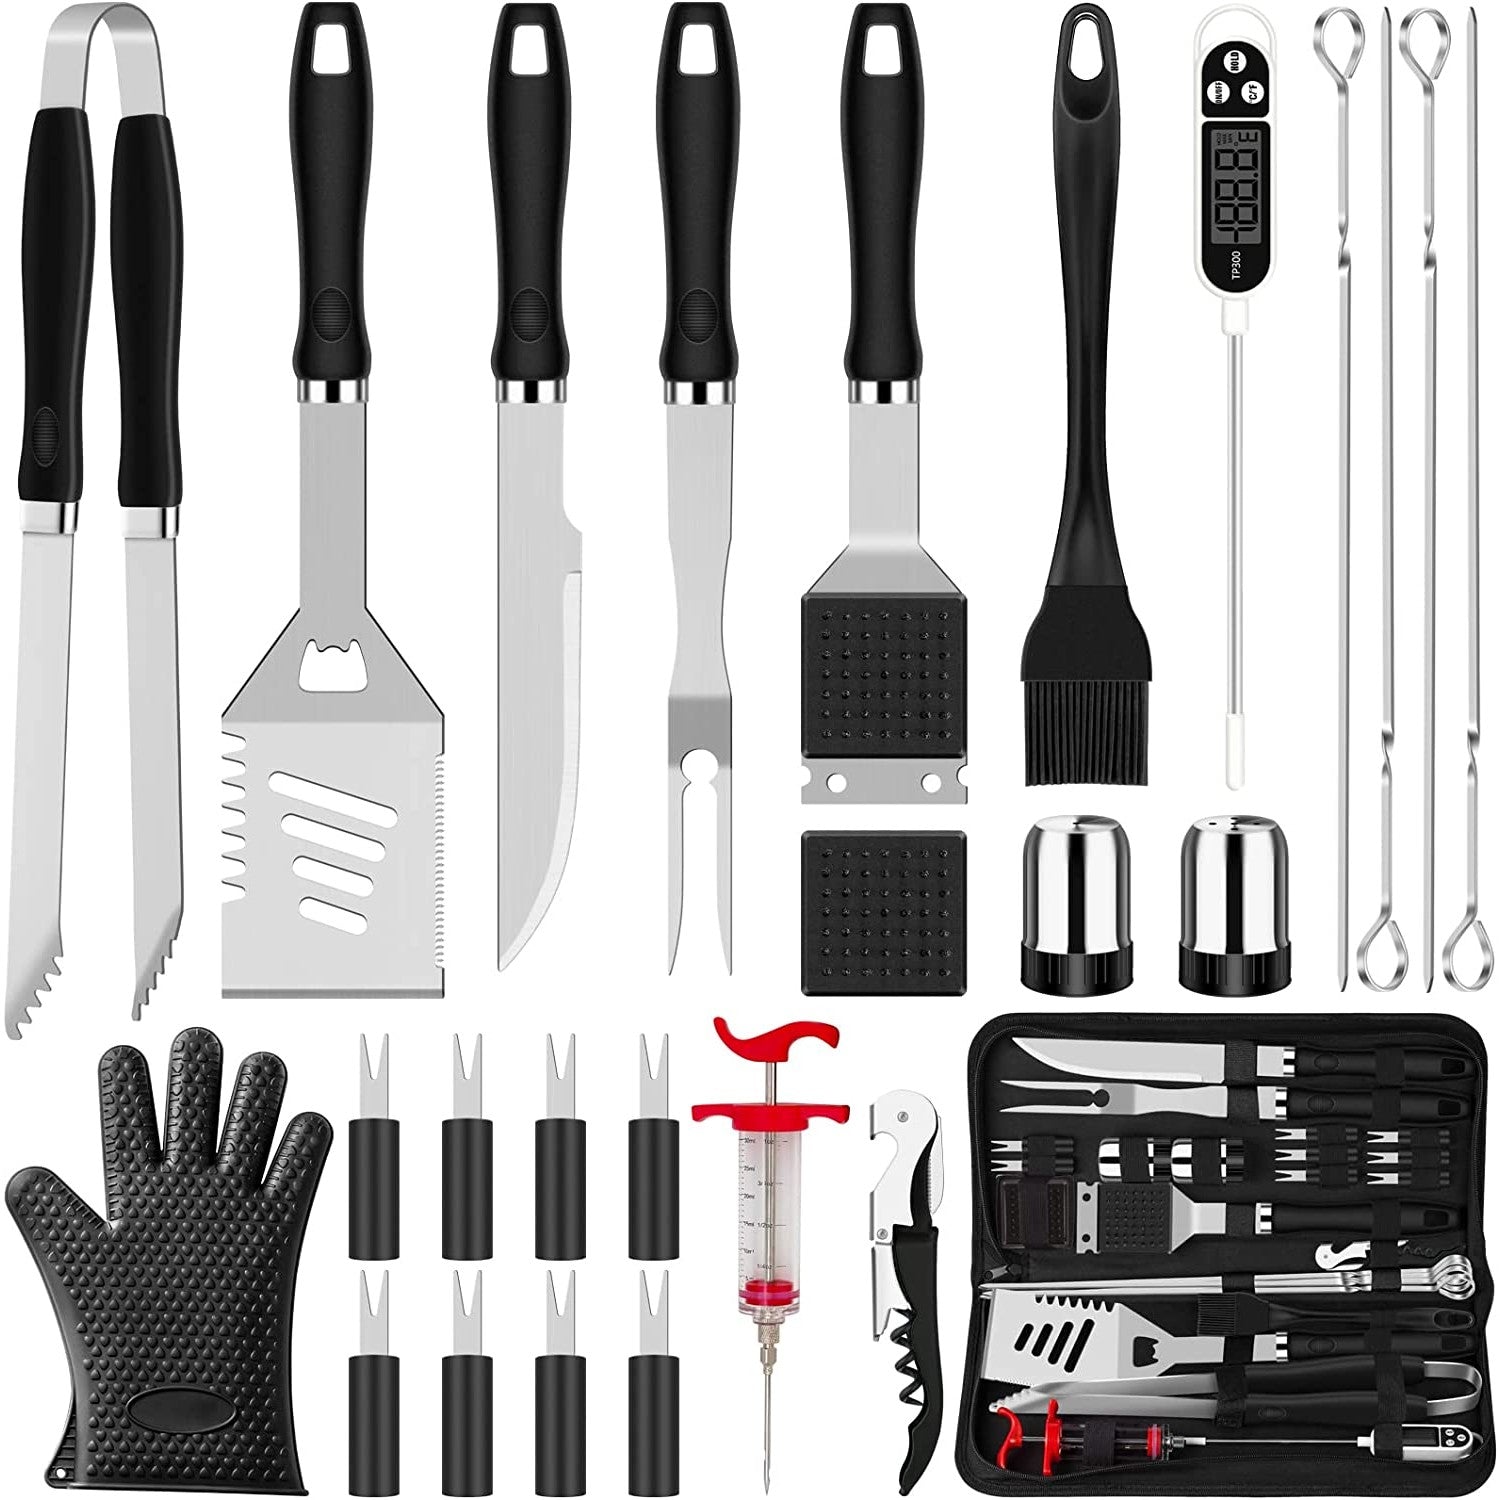 26 bbq grilling tools laid out on a white background. There is an inset image of all the 26 tools inside a black carry bag.